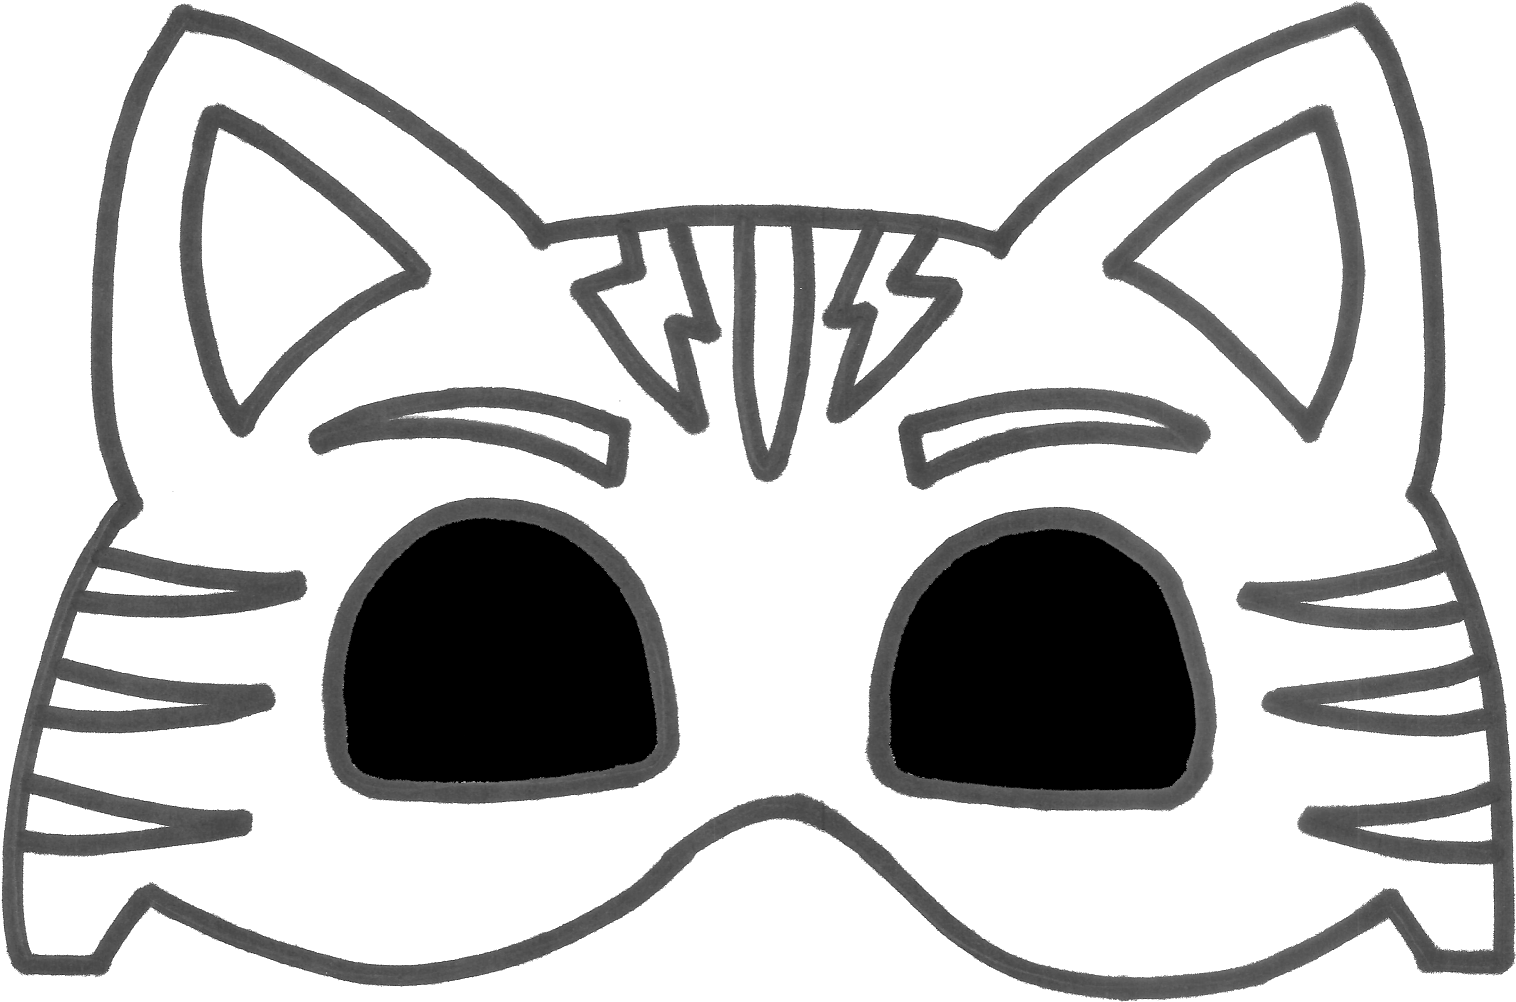 Catboy Mask Coloring Pages / PJ MASKS Coloring Pages | Coloring Catboy